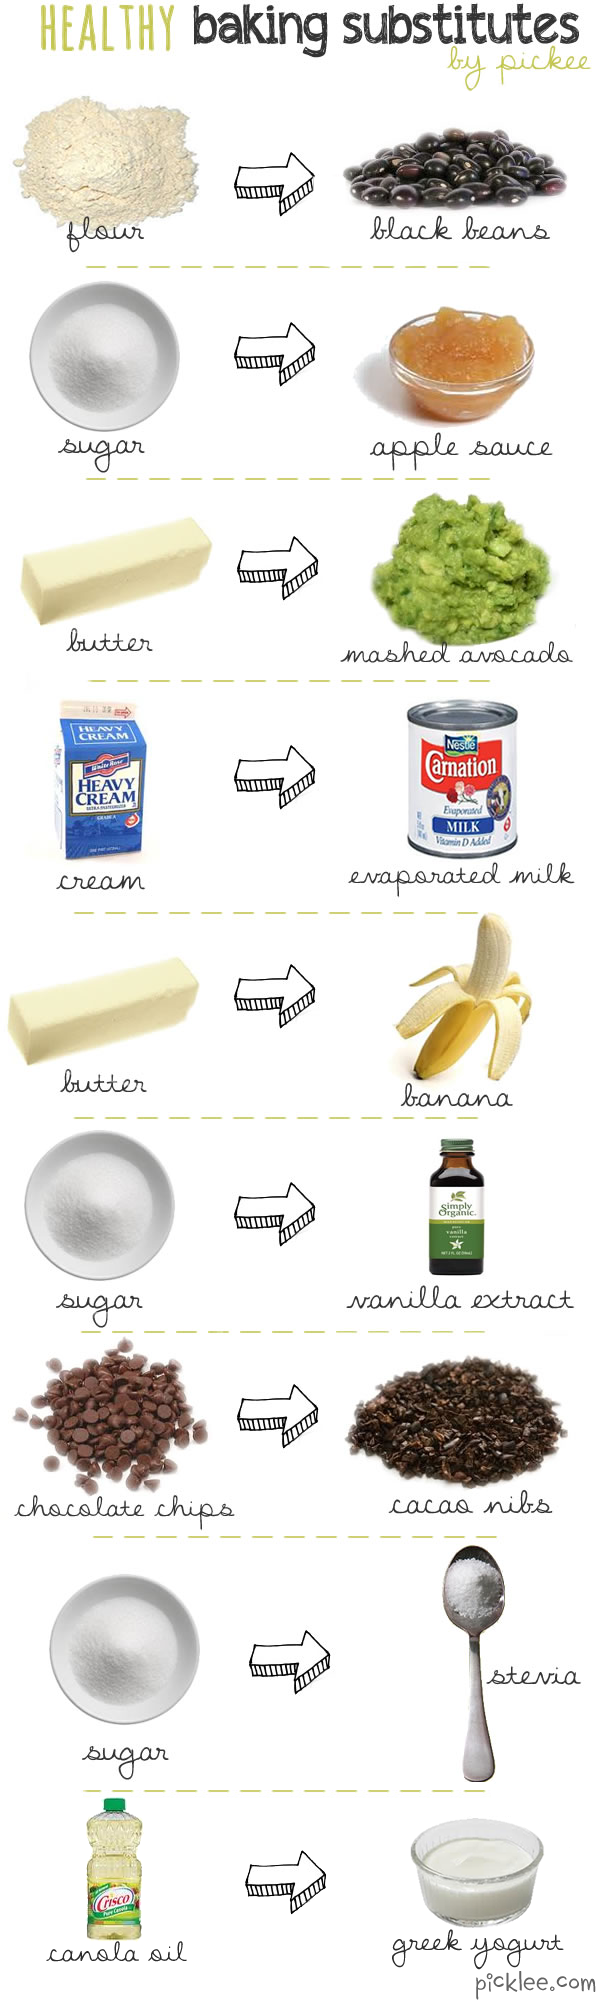 healthy baking substitutions – I use lots of these regularly and will never go b